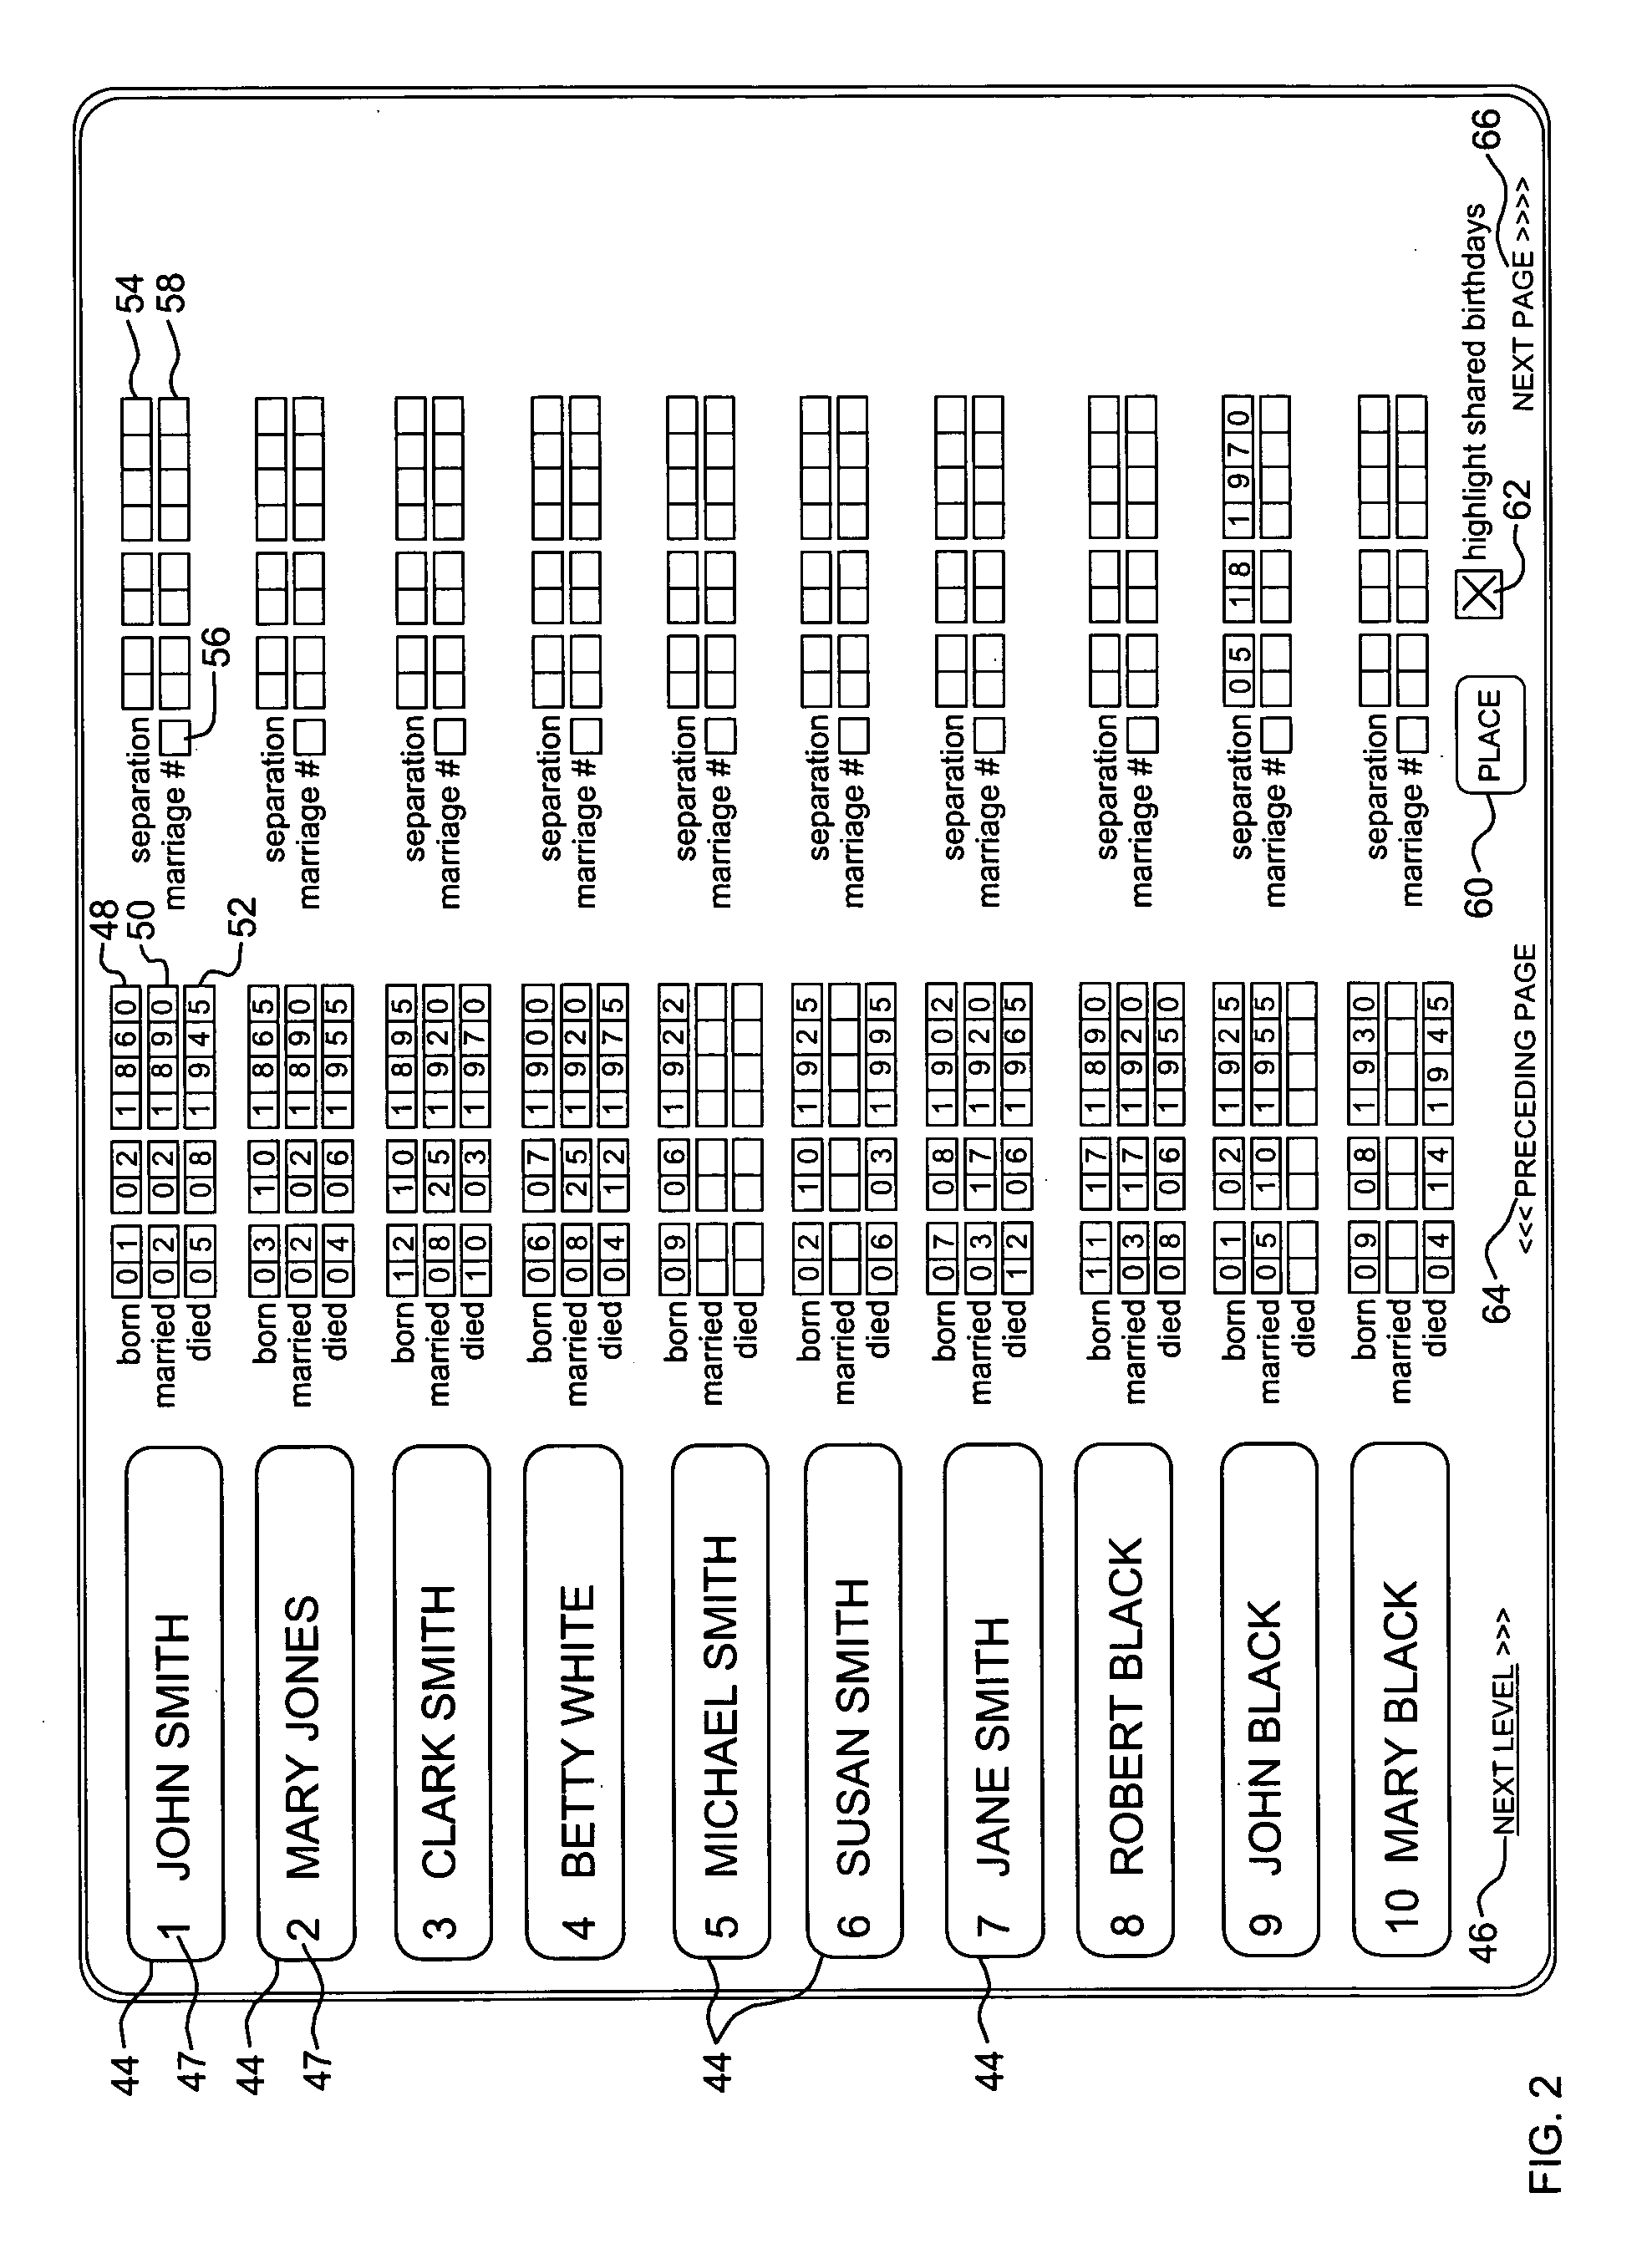 Method and system for generating a family tree